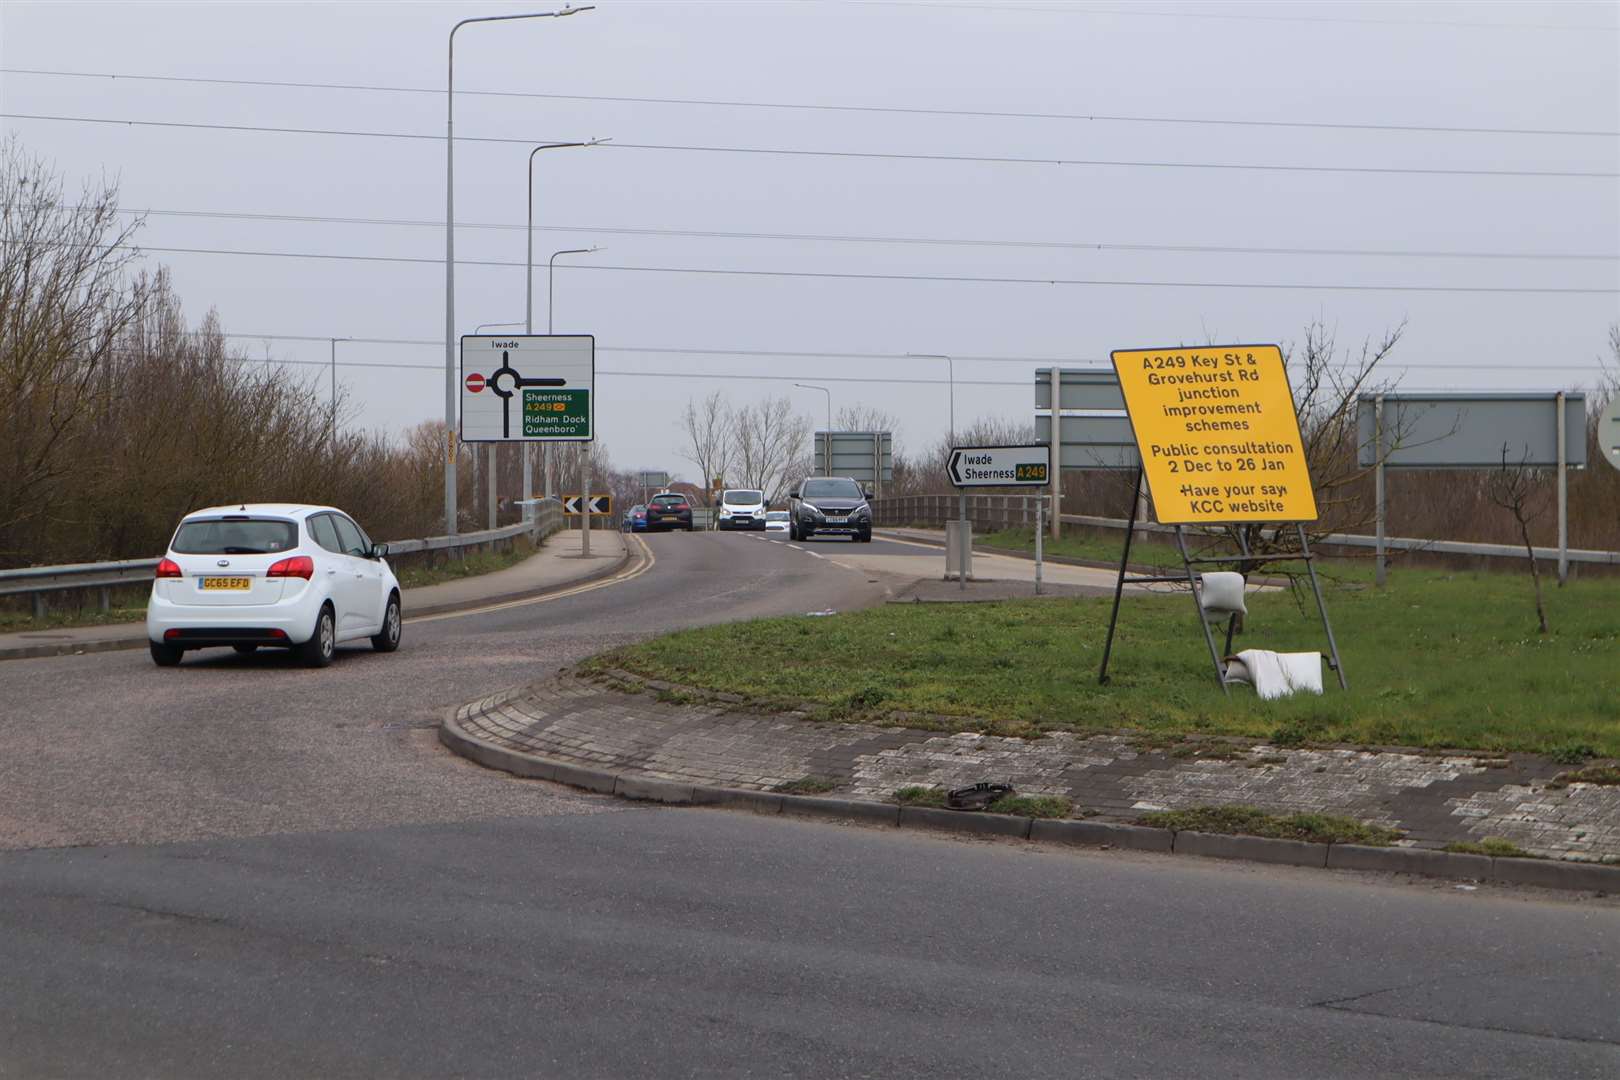 Grovehurst roundabout on the A249 at Iwade and Kemsley near Sittingbourne to be upgraded